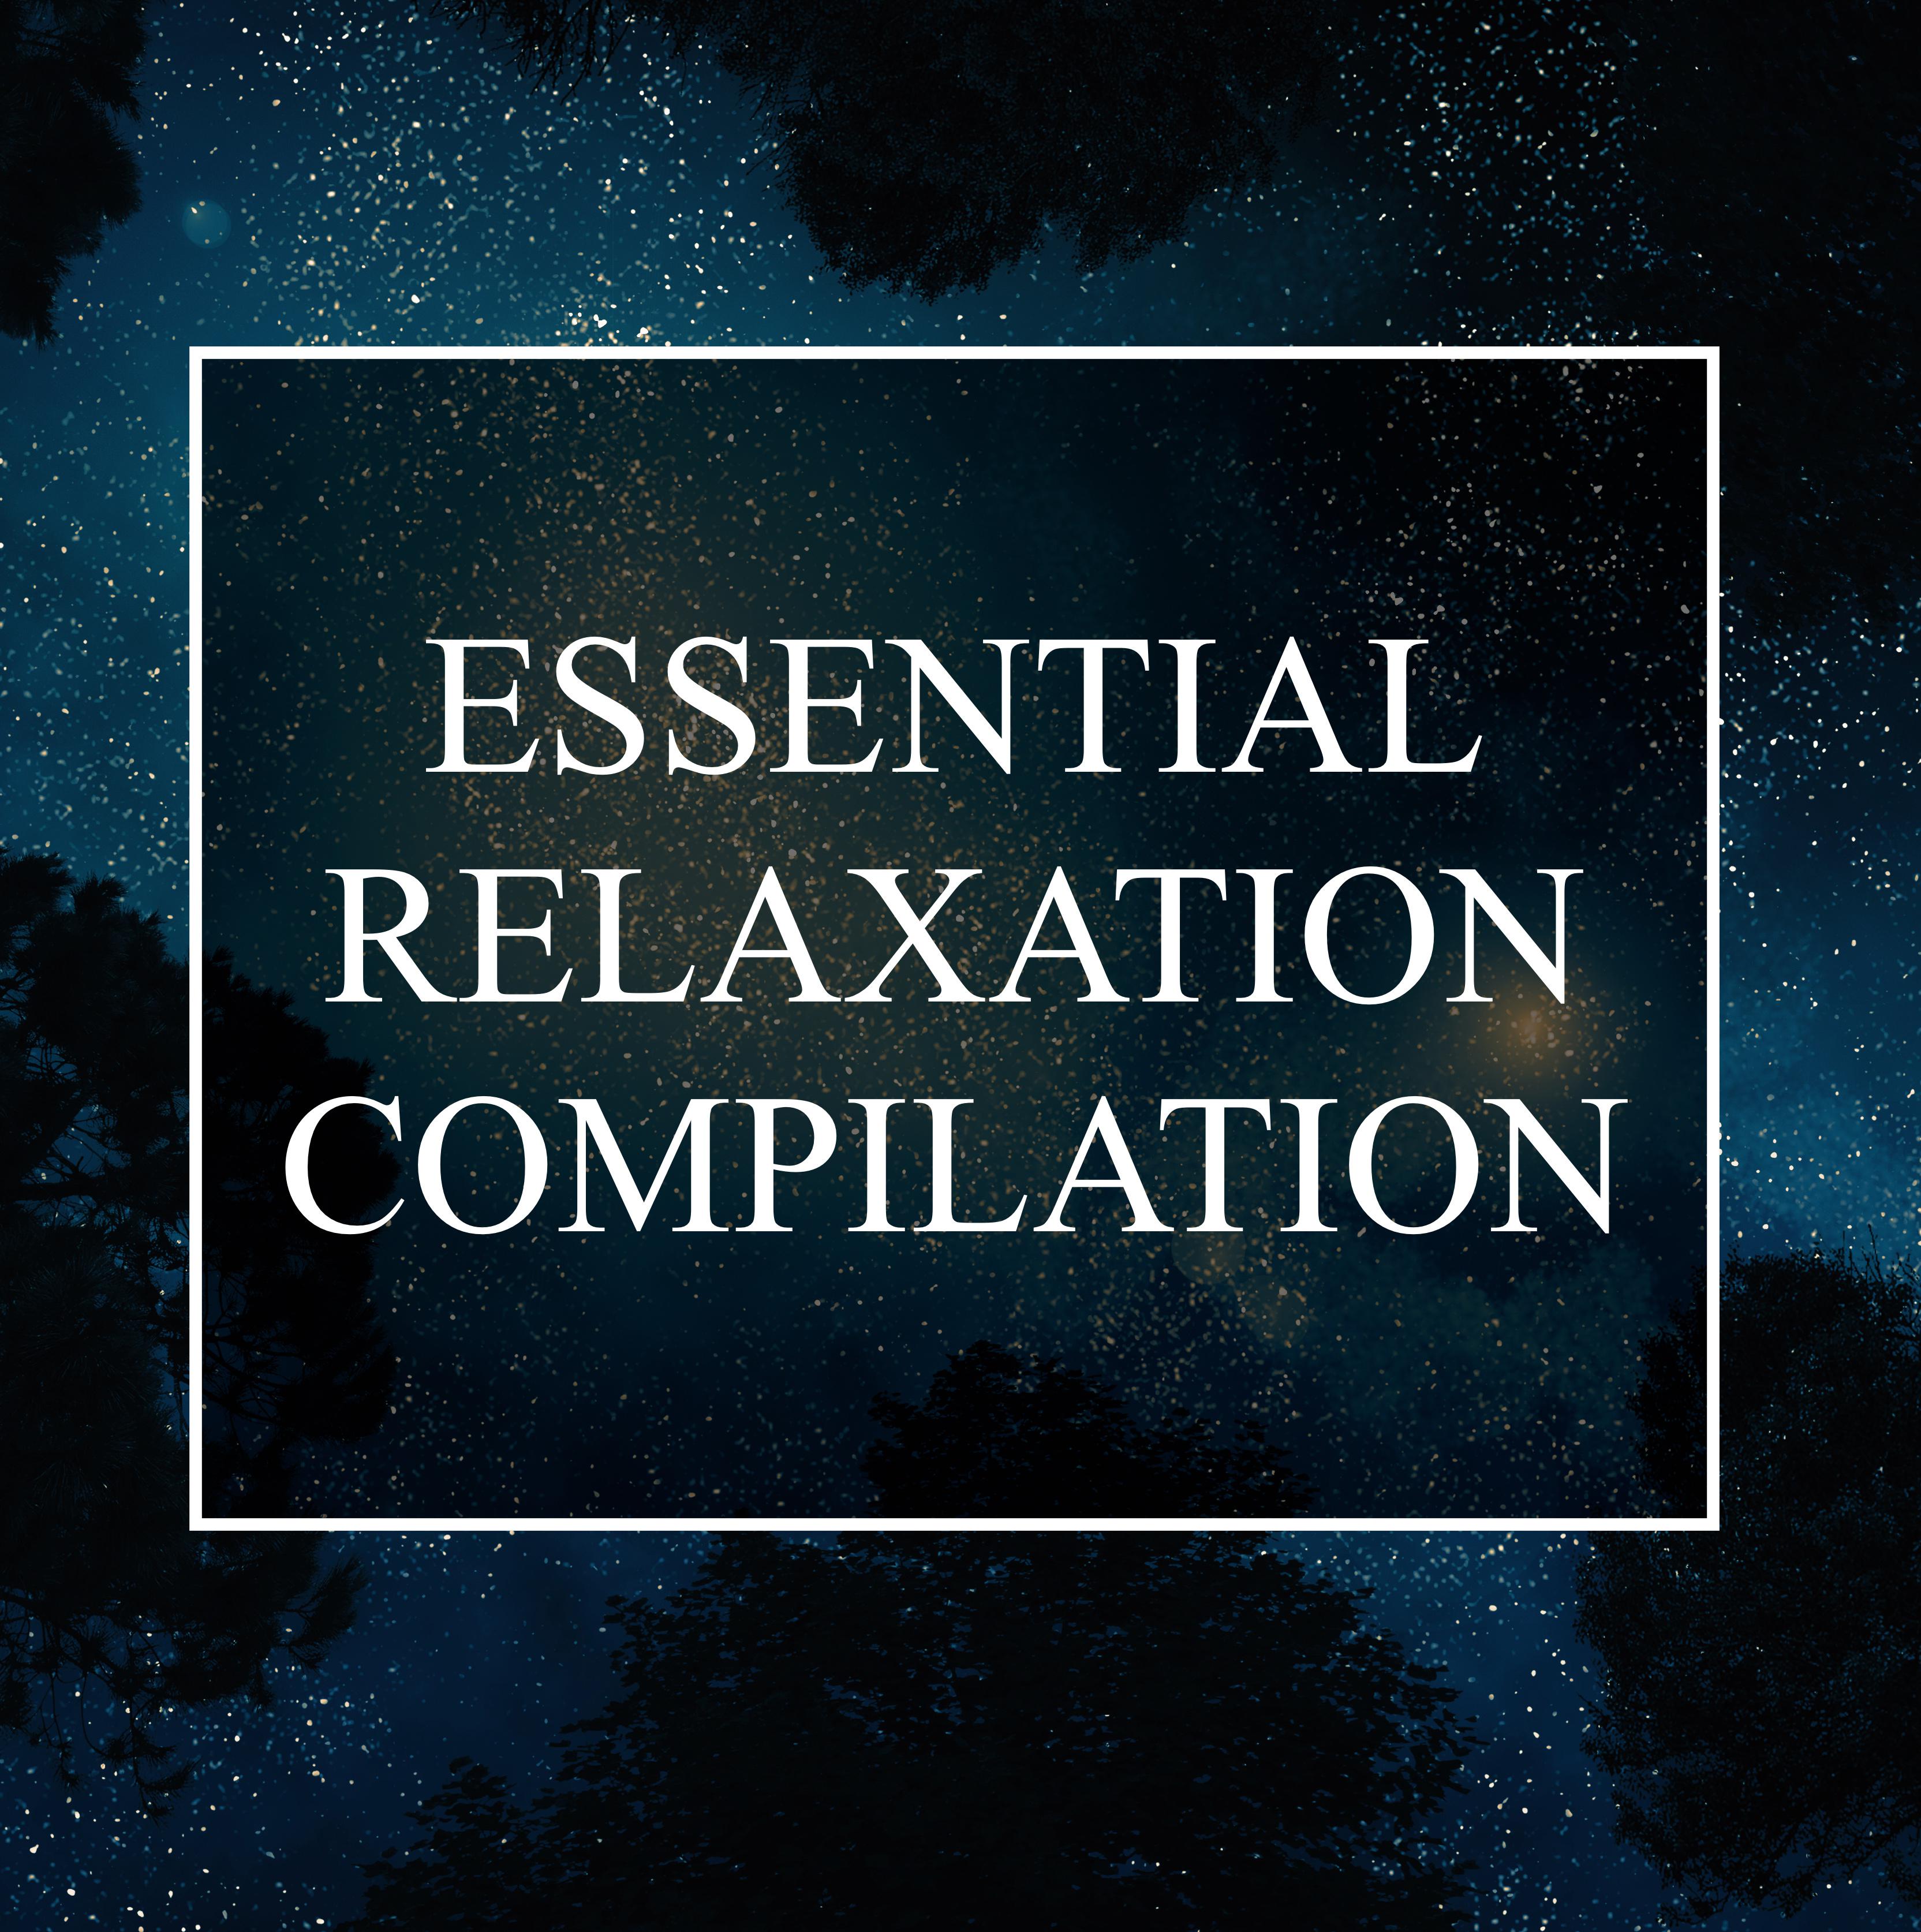 Essential Relaxation Compilation - Chillout & Ambient Pieces for Stress Relief, Study Help, Mindfulness, Creativity and Inspiration